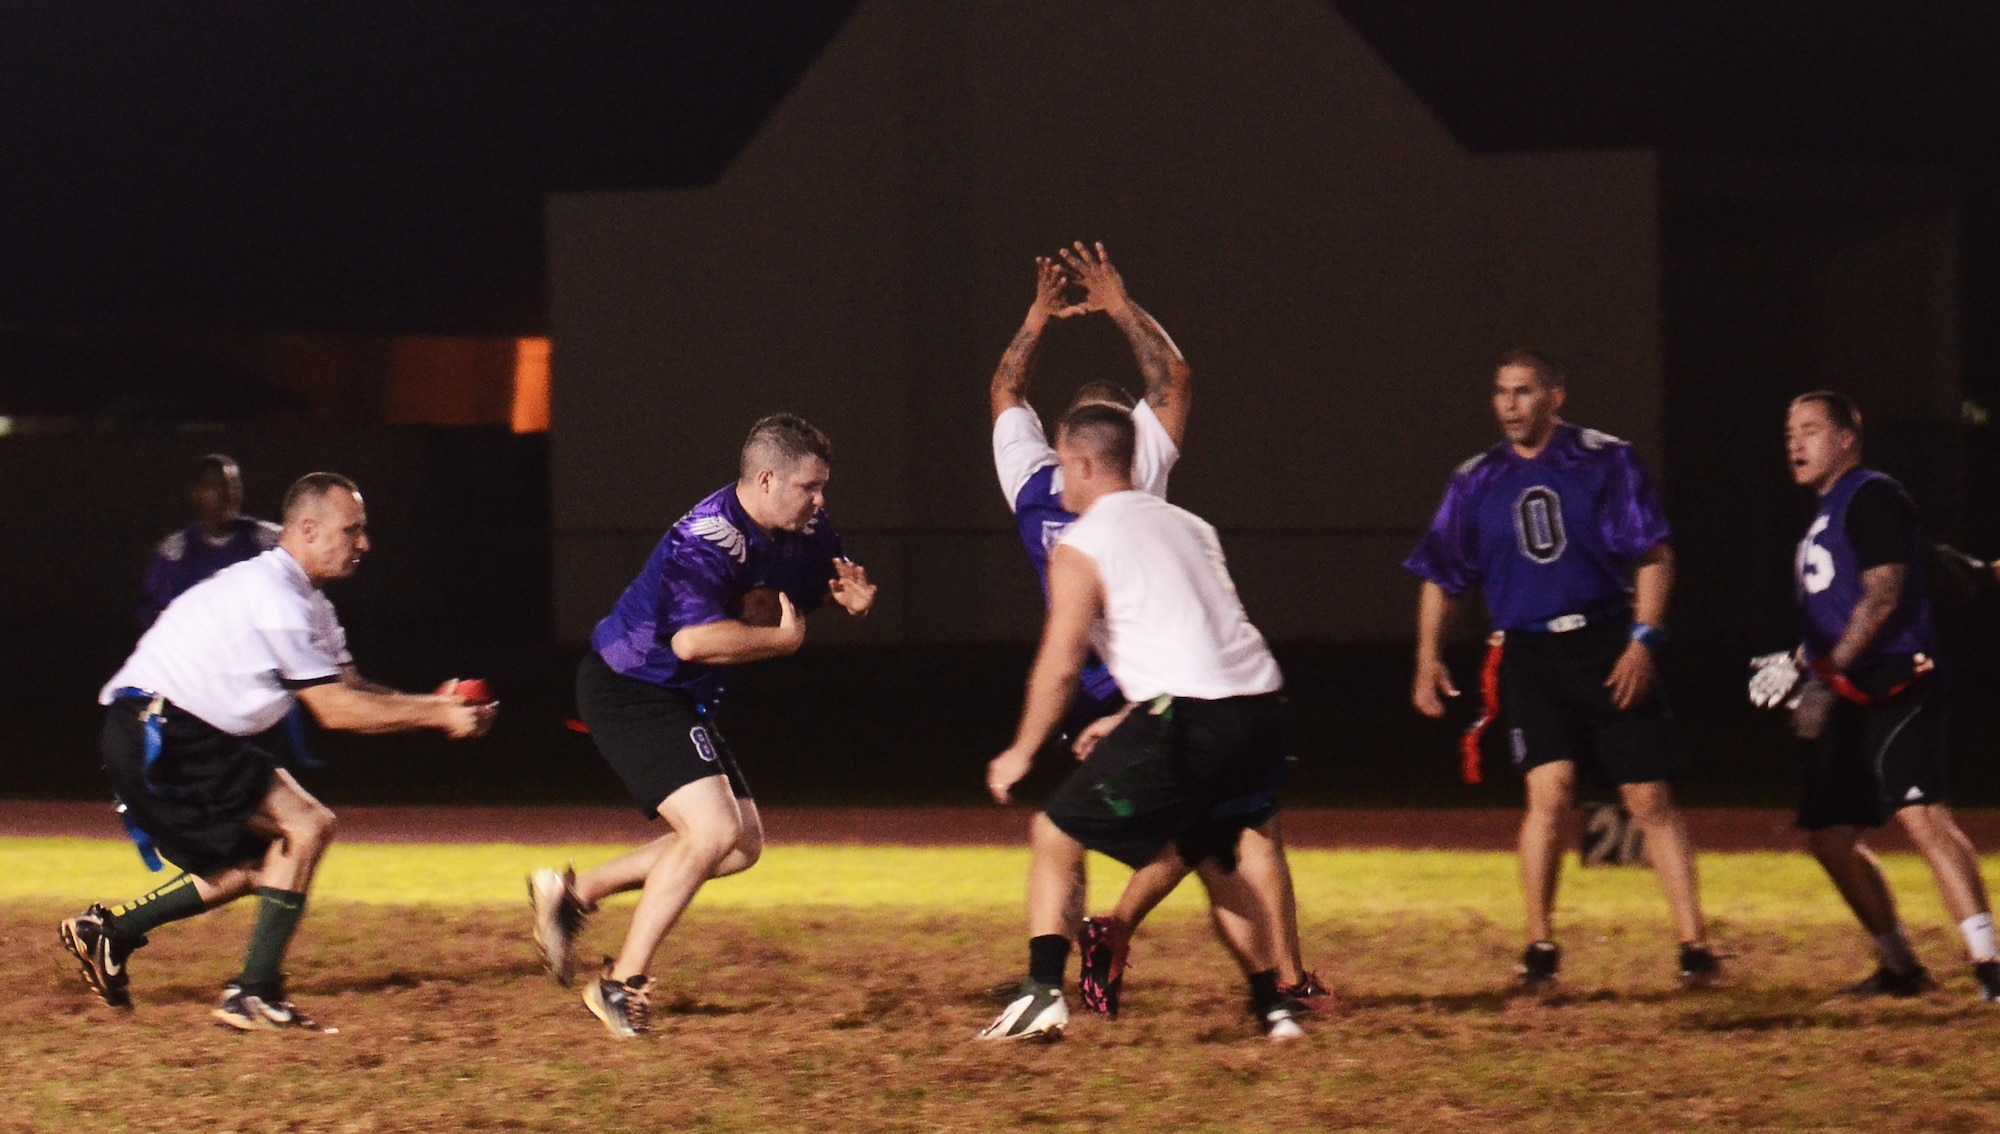 Ernest Clemons, 36th Security Forces Squadron, attempts to evade his opponents during an intramural flag football playoff game between 36th SFS and 736th Security Forces Squadron on Andersen Air Force Base, Guam, Jan. 14, 2014. The championship game is scheduled for Jan. 17 at 6 p.m. (U.S. Air Force photo by Airman 1st Class Mariah Haddenham/Released)